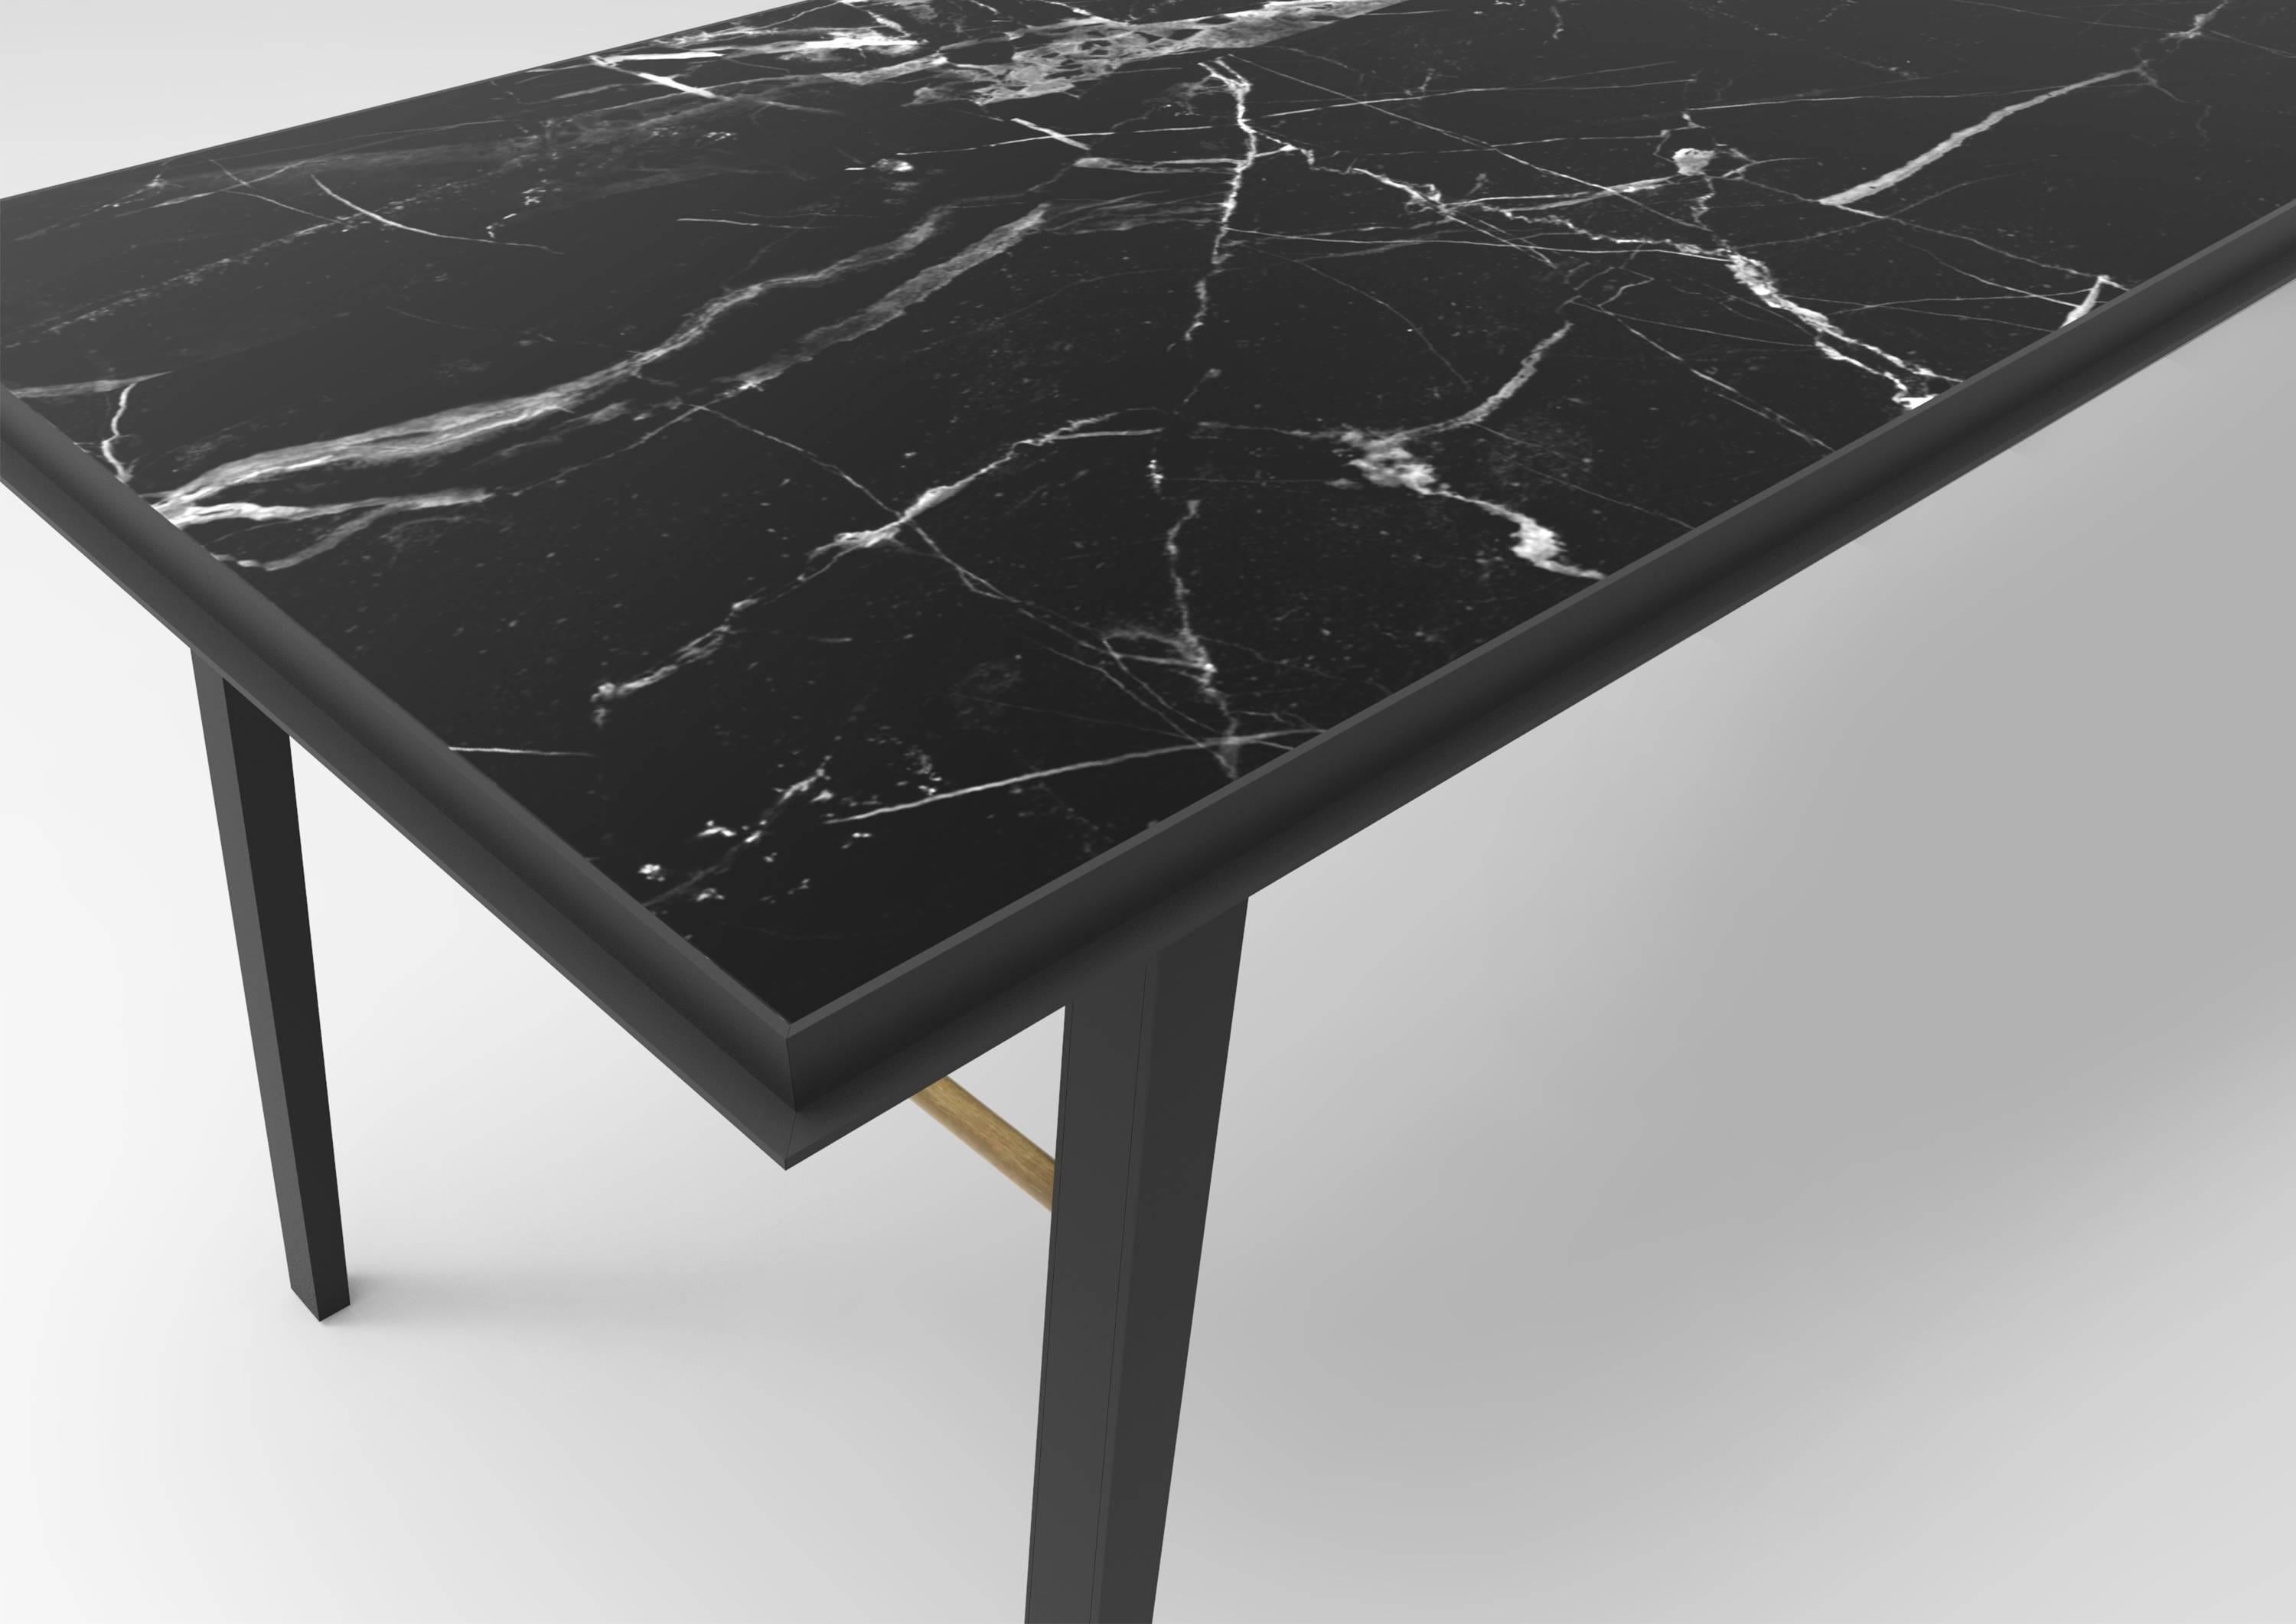 AES black marble contemporary desk, Jan Garncarek
Materials: Nero Marquina marble, brass, steel.
Dimensions: 73 x 180 x 78 cm
Weight: 110 kg

This unique desk consists of a metal collar with nero marquina marble top.
The frame is made from black